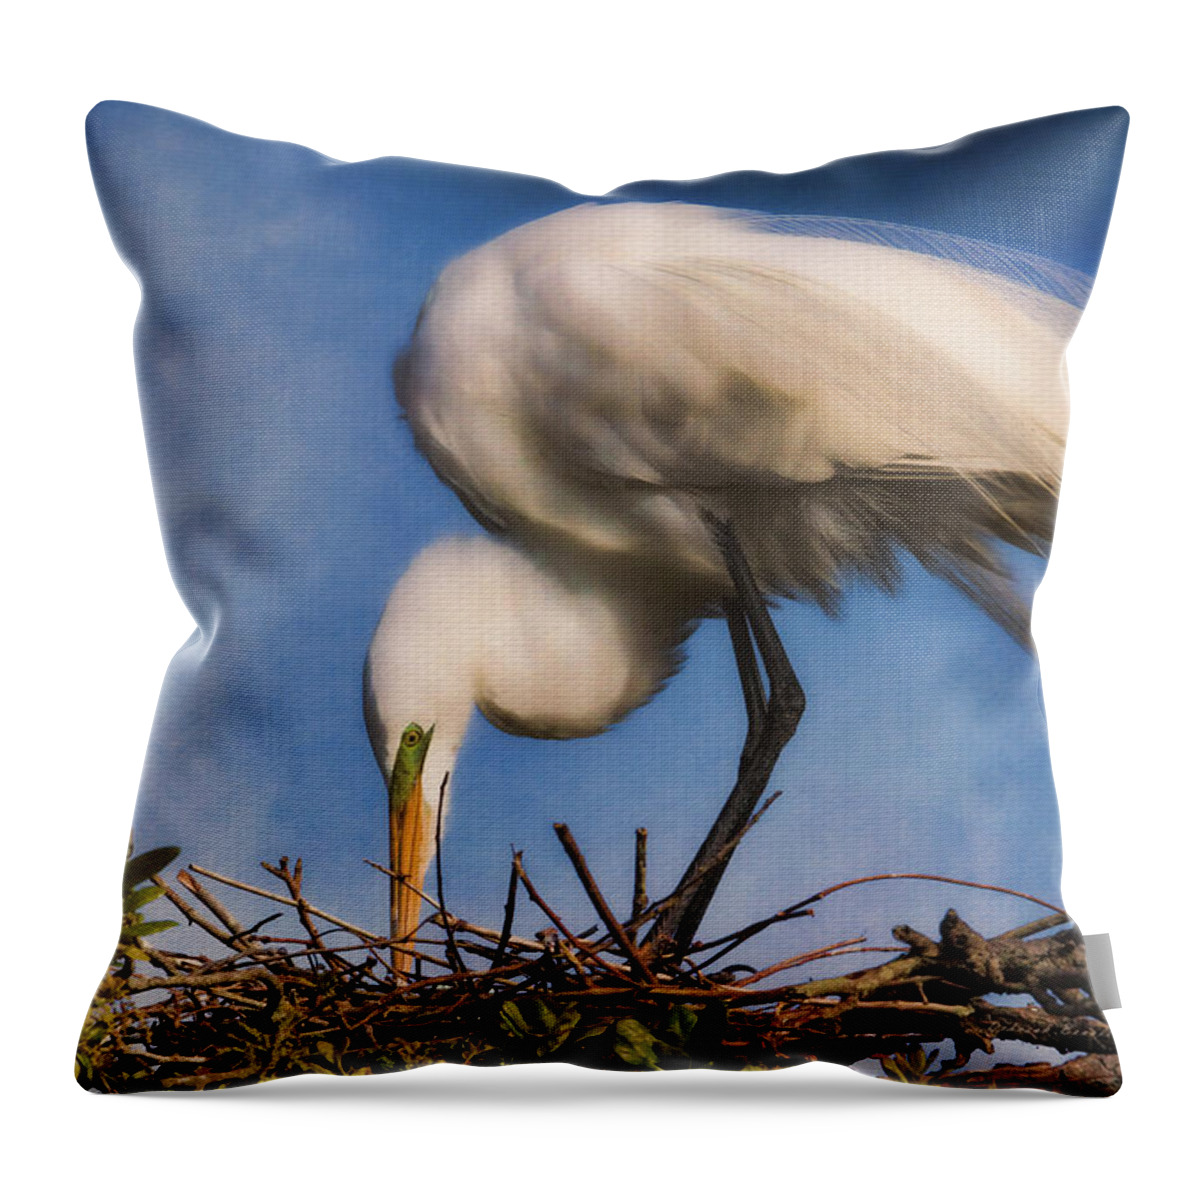 Egret Throw Pillow featuring the photograph Are They Going To Hatch Soon by Deborah Benoit